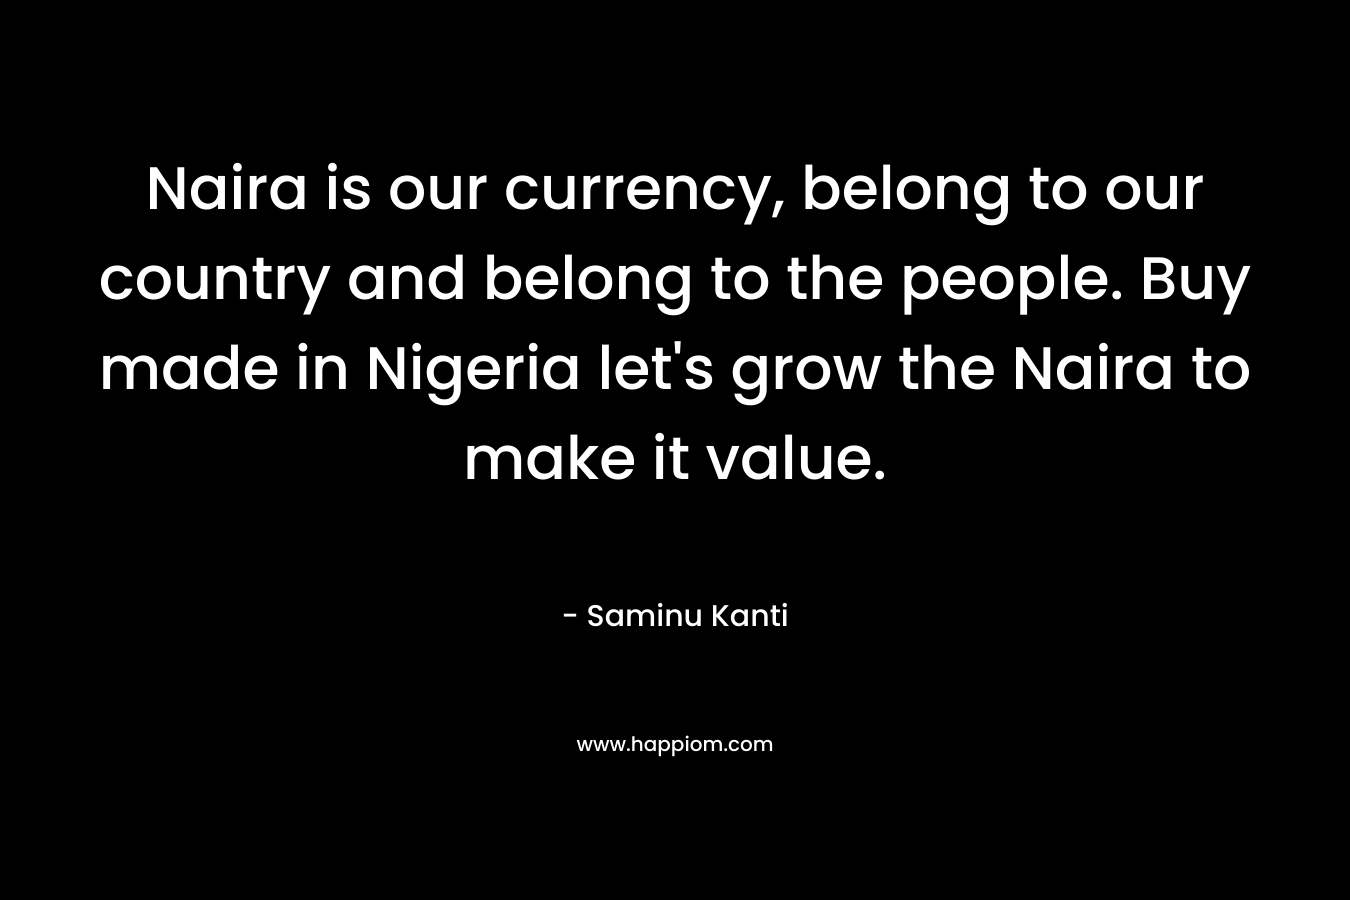 Naira is our currency, belong to our country and belong to the people. Buy made in Nigeria let’s grow the Naira to make it value. – Saminu Kanti